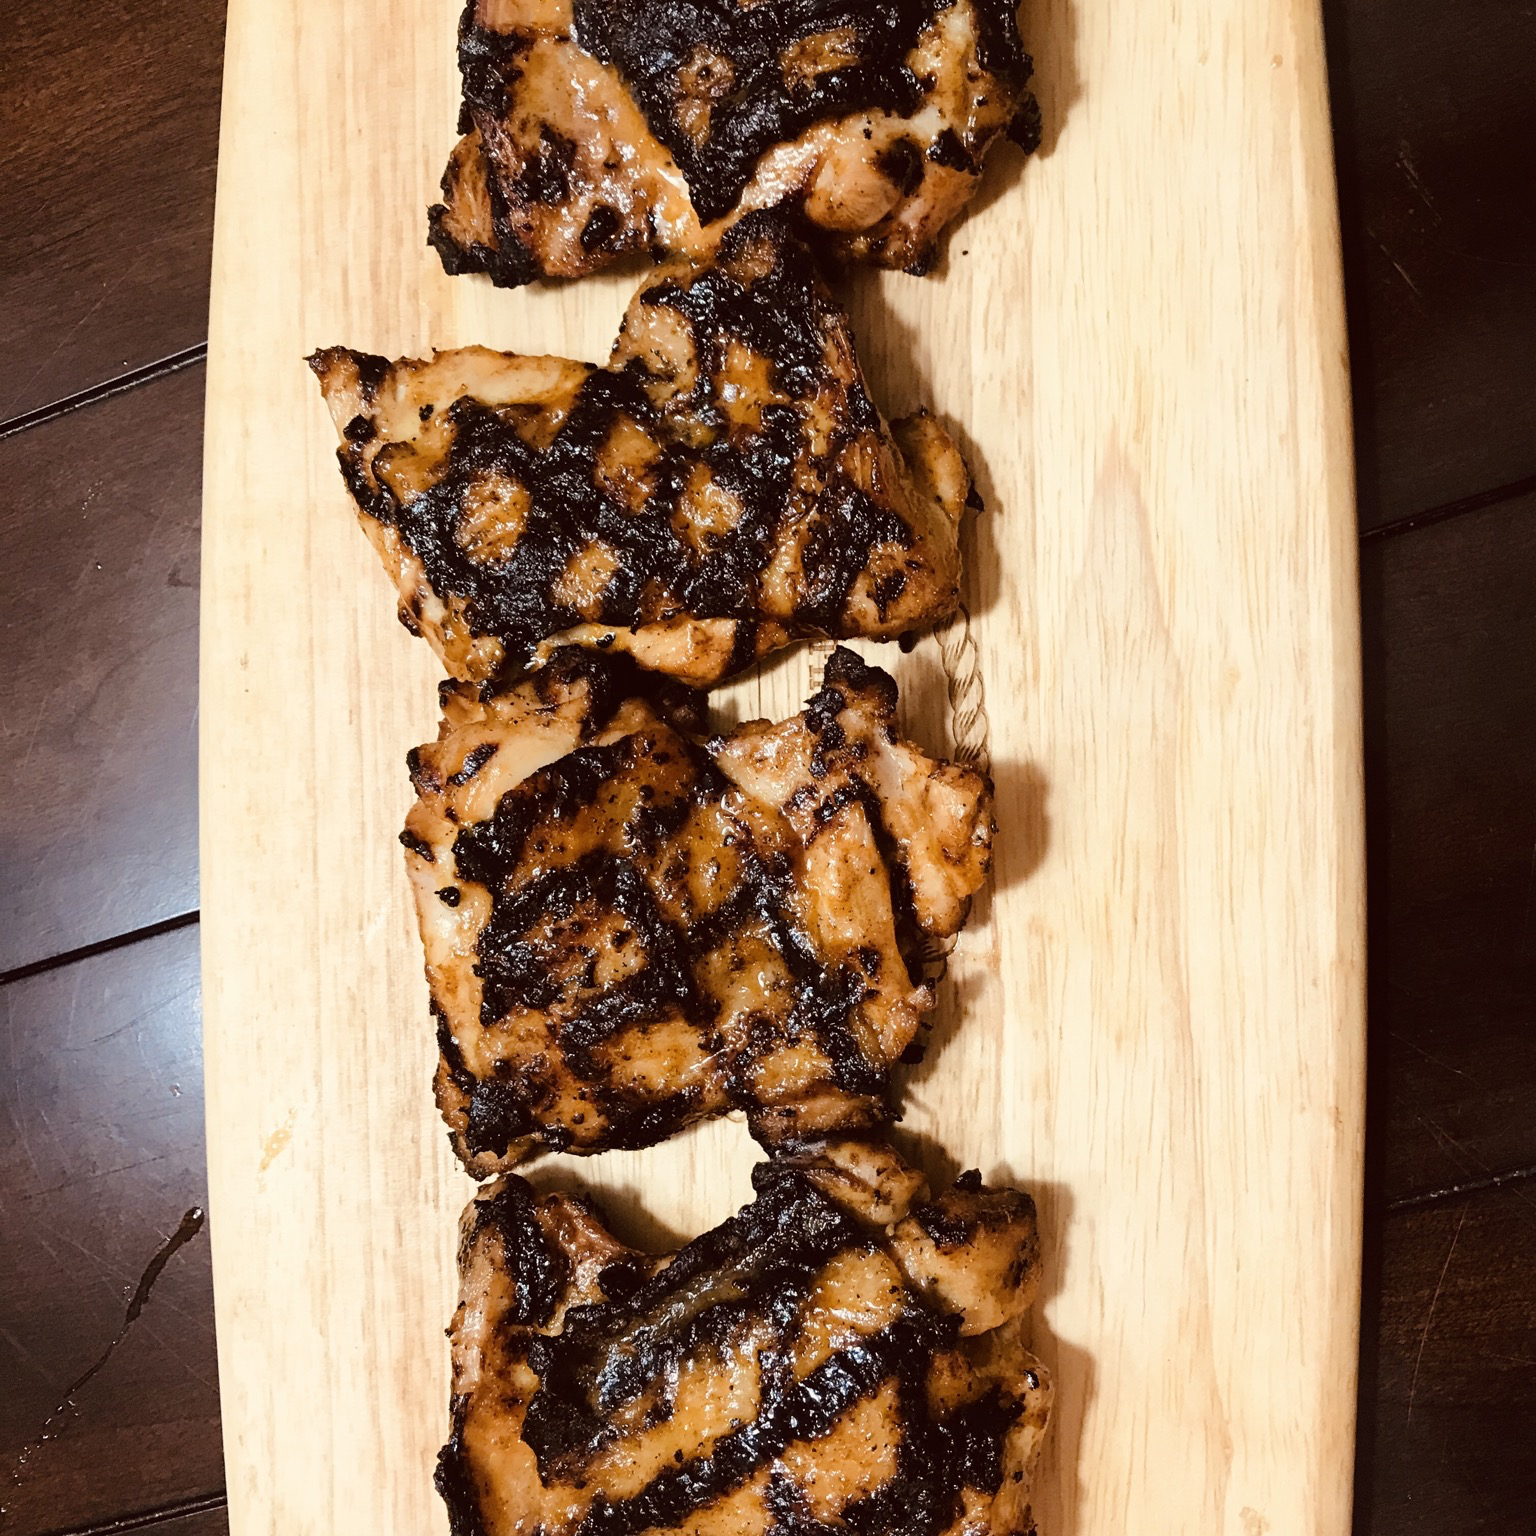 Grilled Chicken Thighs with Mango-Ancho Sauce BaseballFan